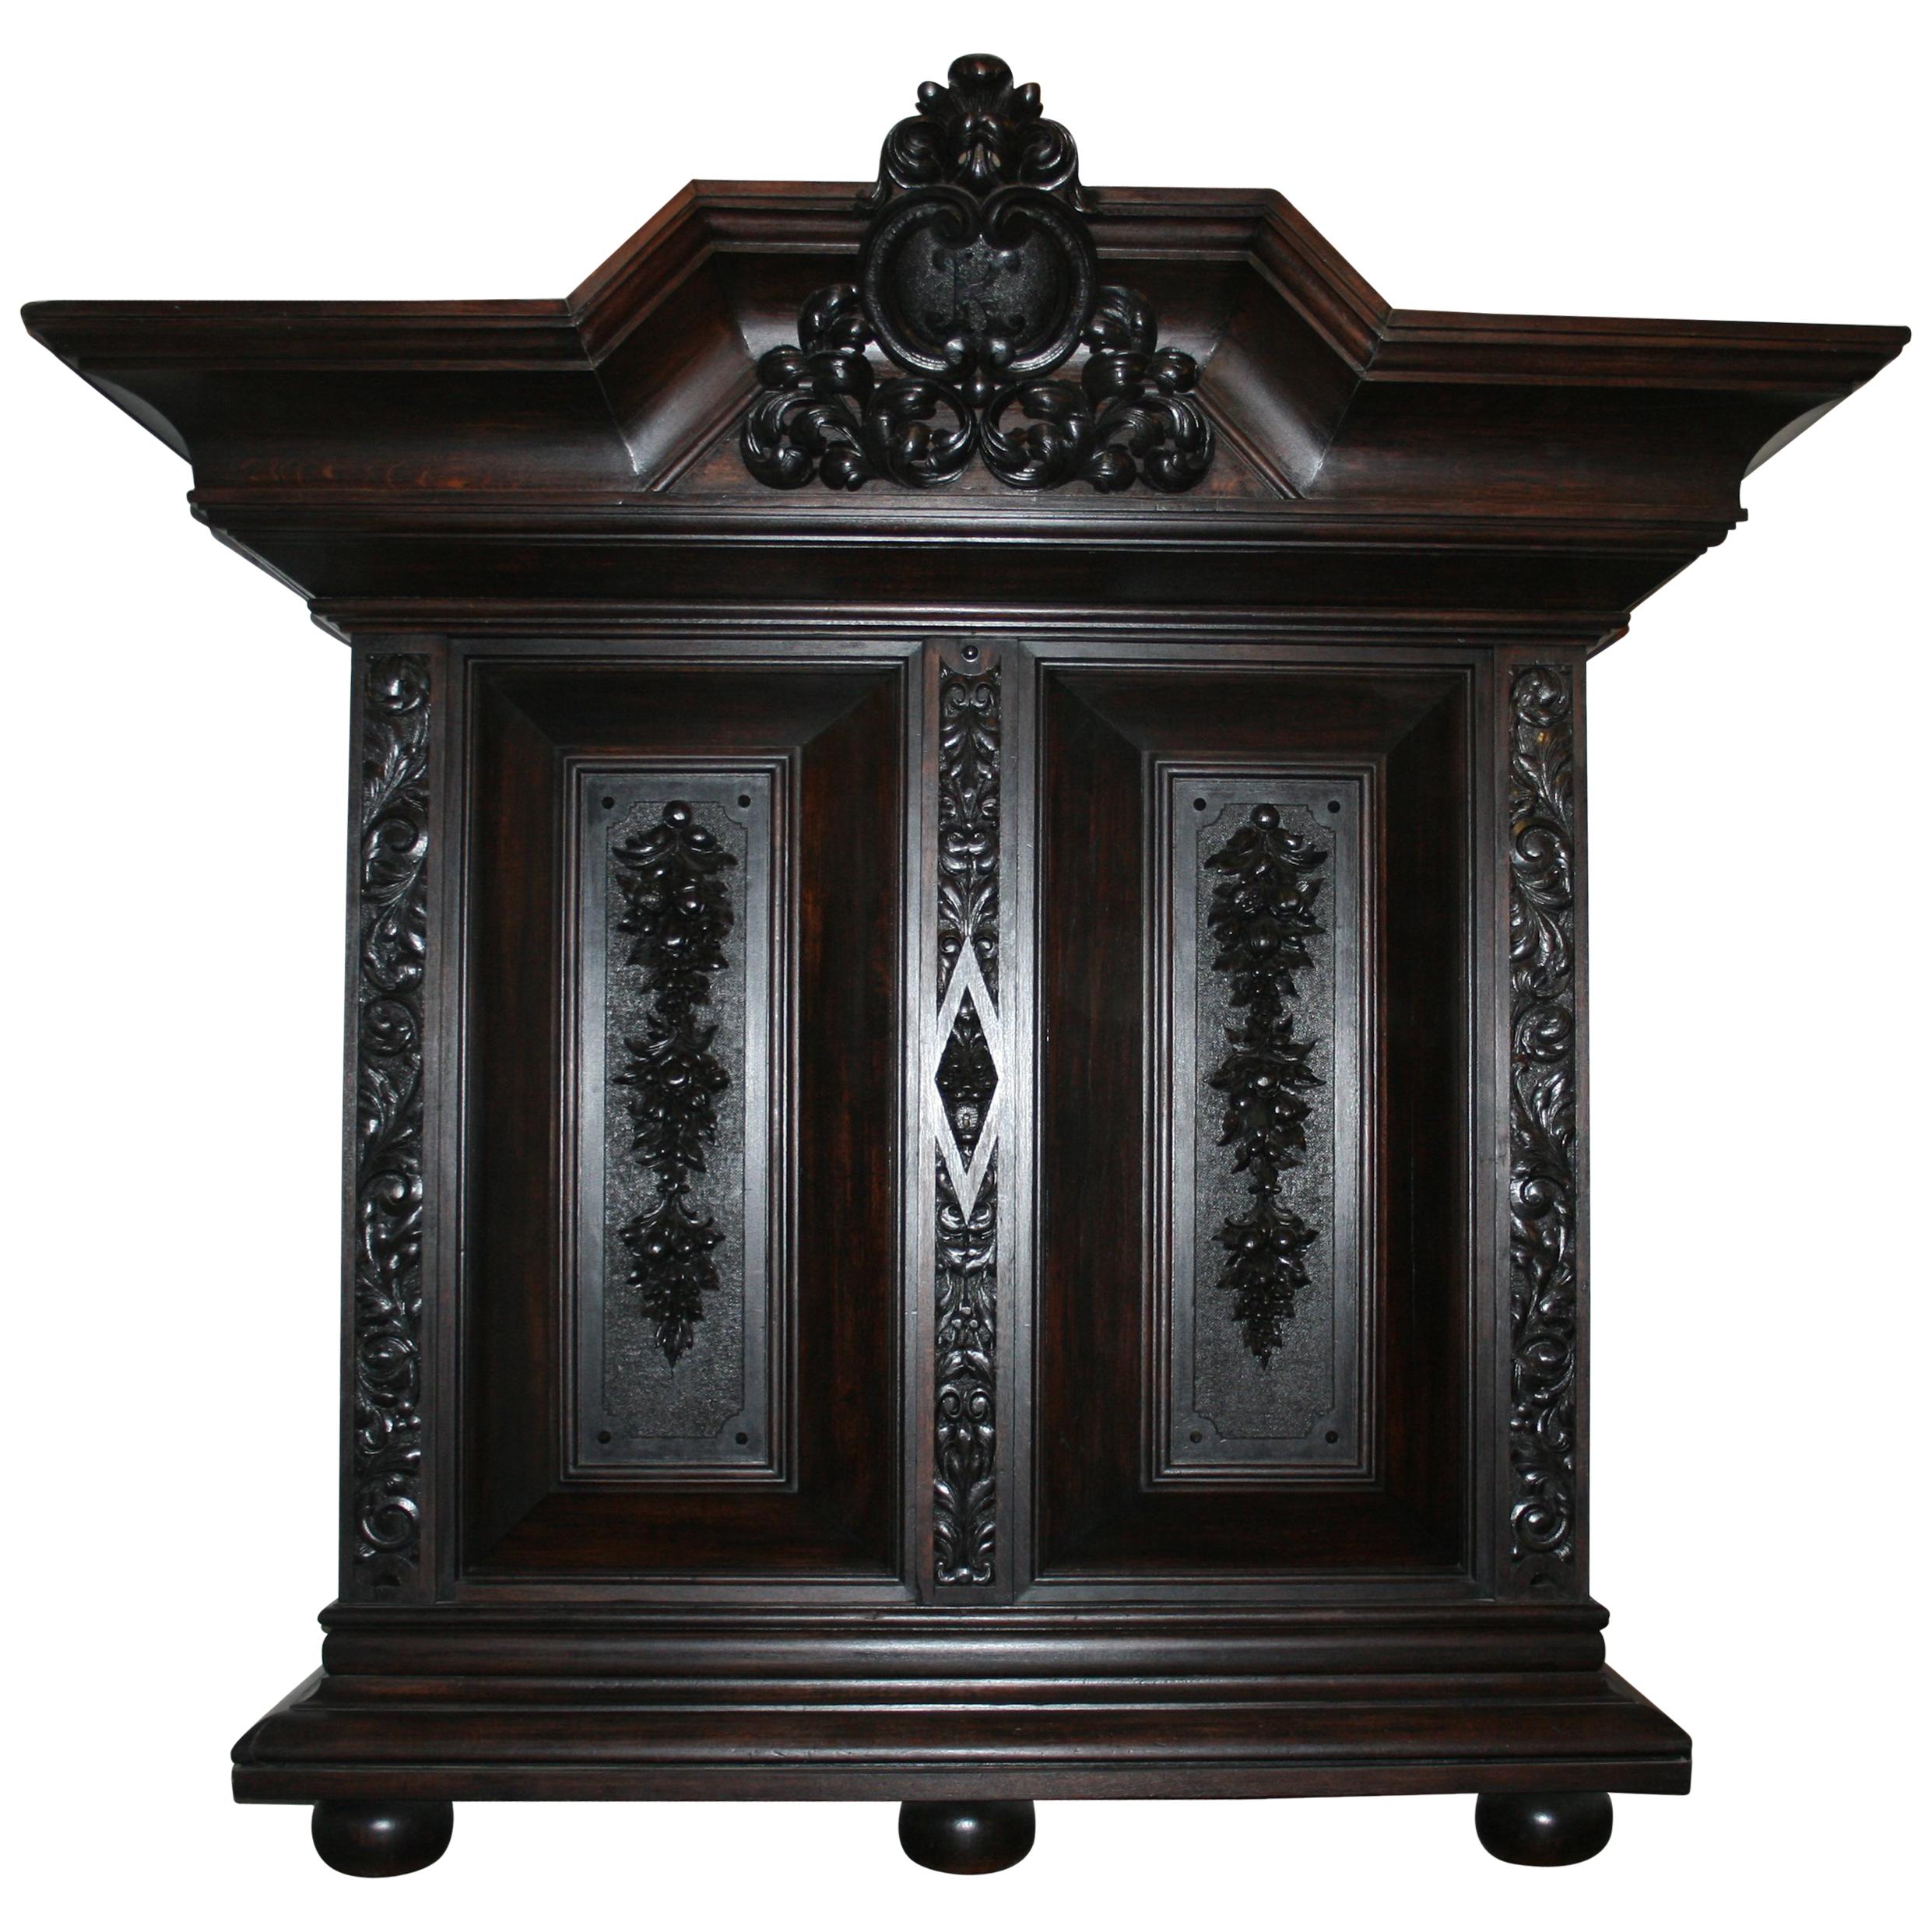 Late 19th Century German Baroque Style Historicism Cabinet made of Oak